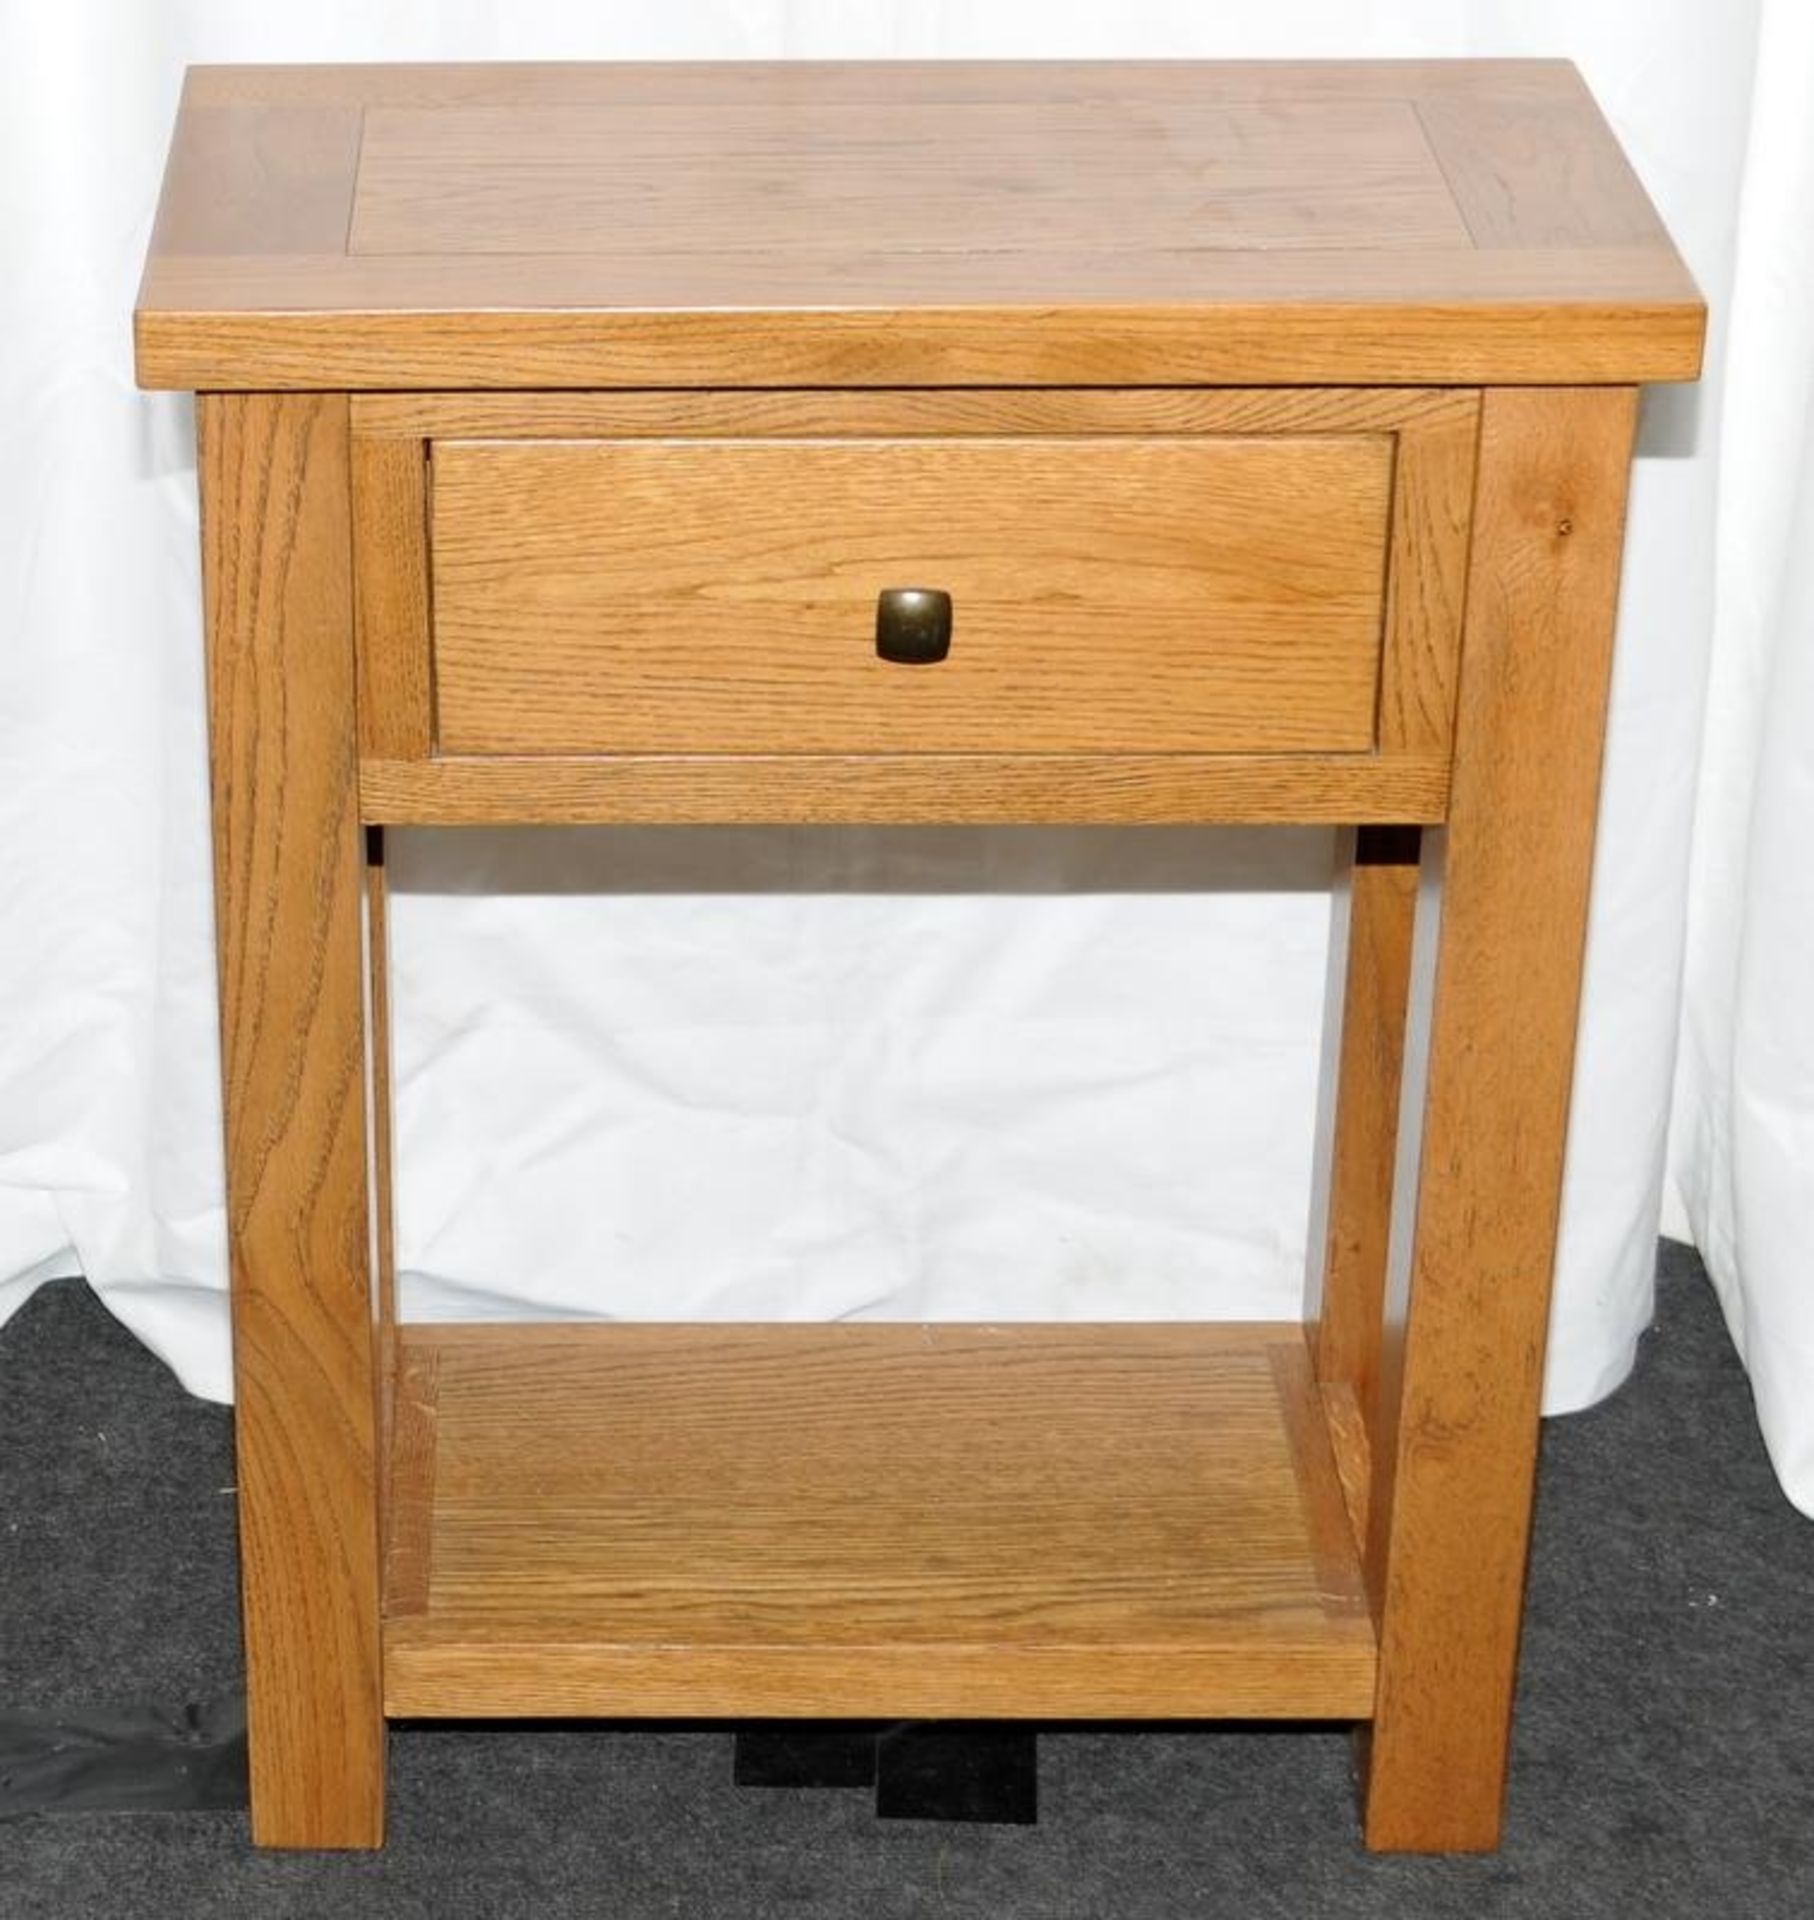 Solid oak side table with single drawer over low shelf. 75cms high x 60cms wide x 30cms deep